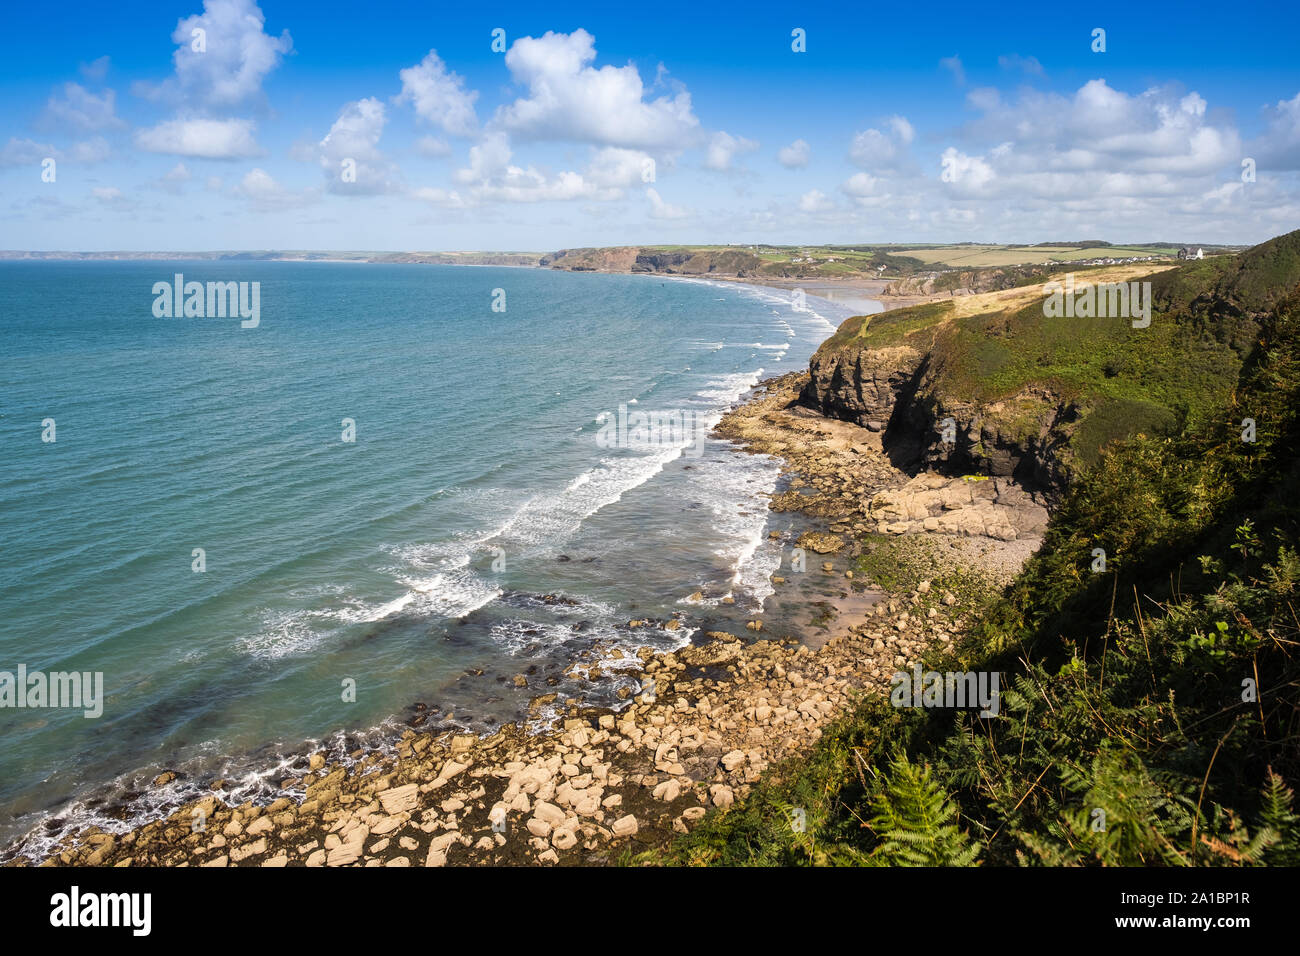 Looking along the coast towards Little Haven, on the coast of St Bride's Bay, Pembrokeshire National Park, South West Wales UK Stock Photo